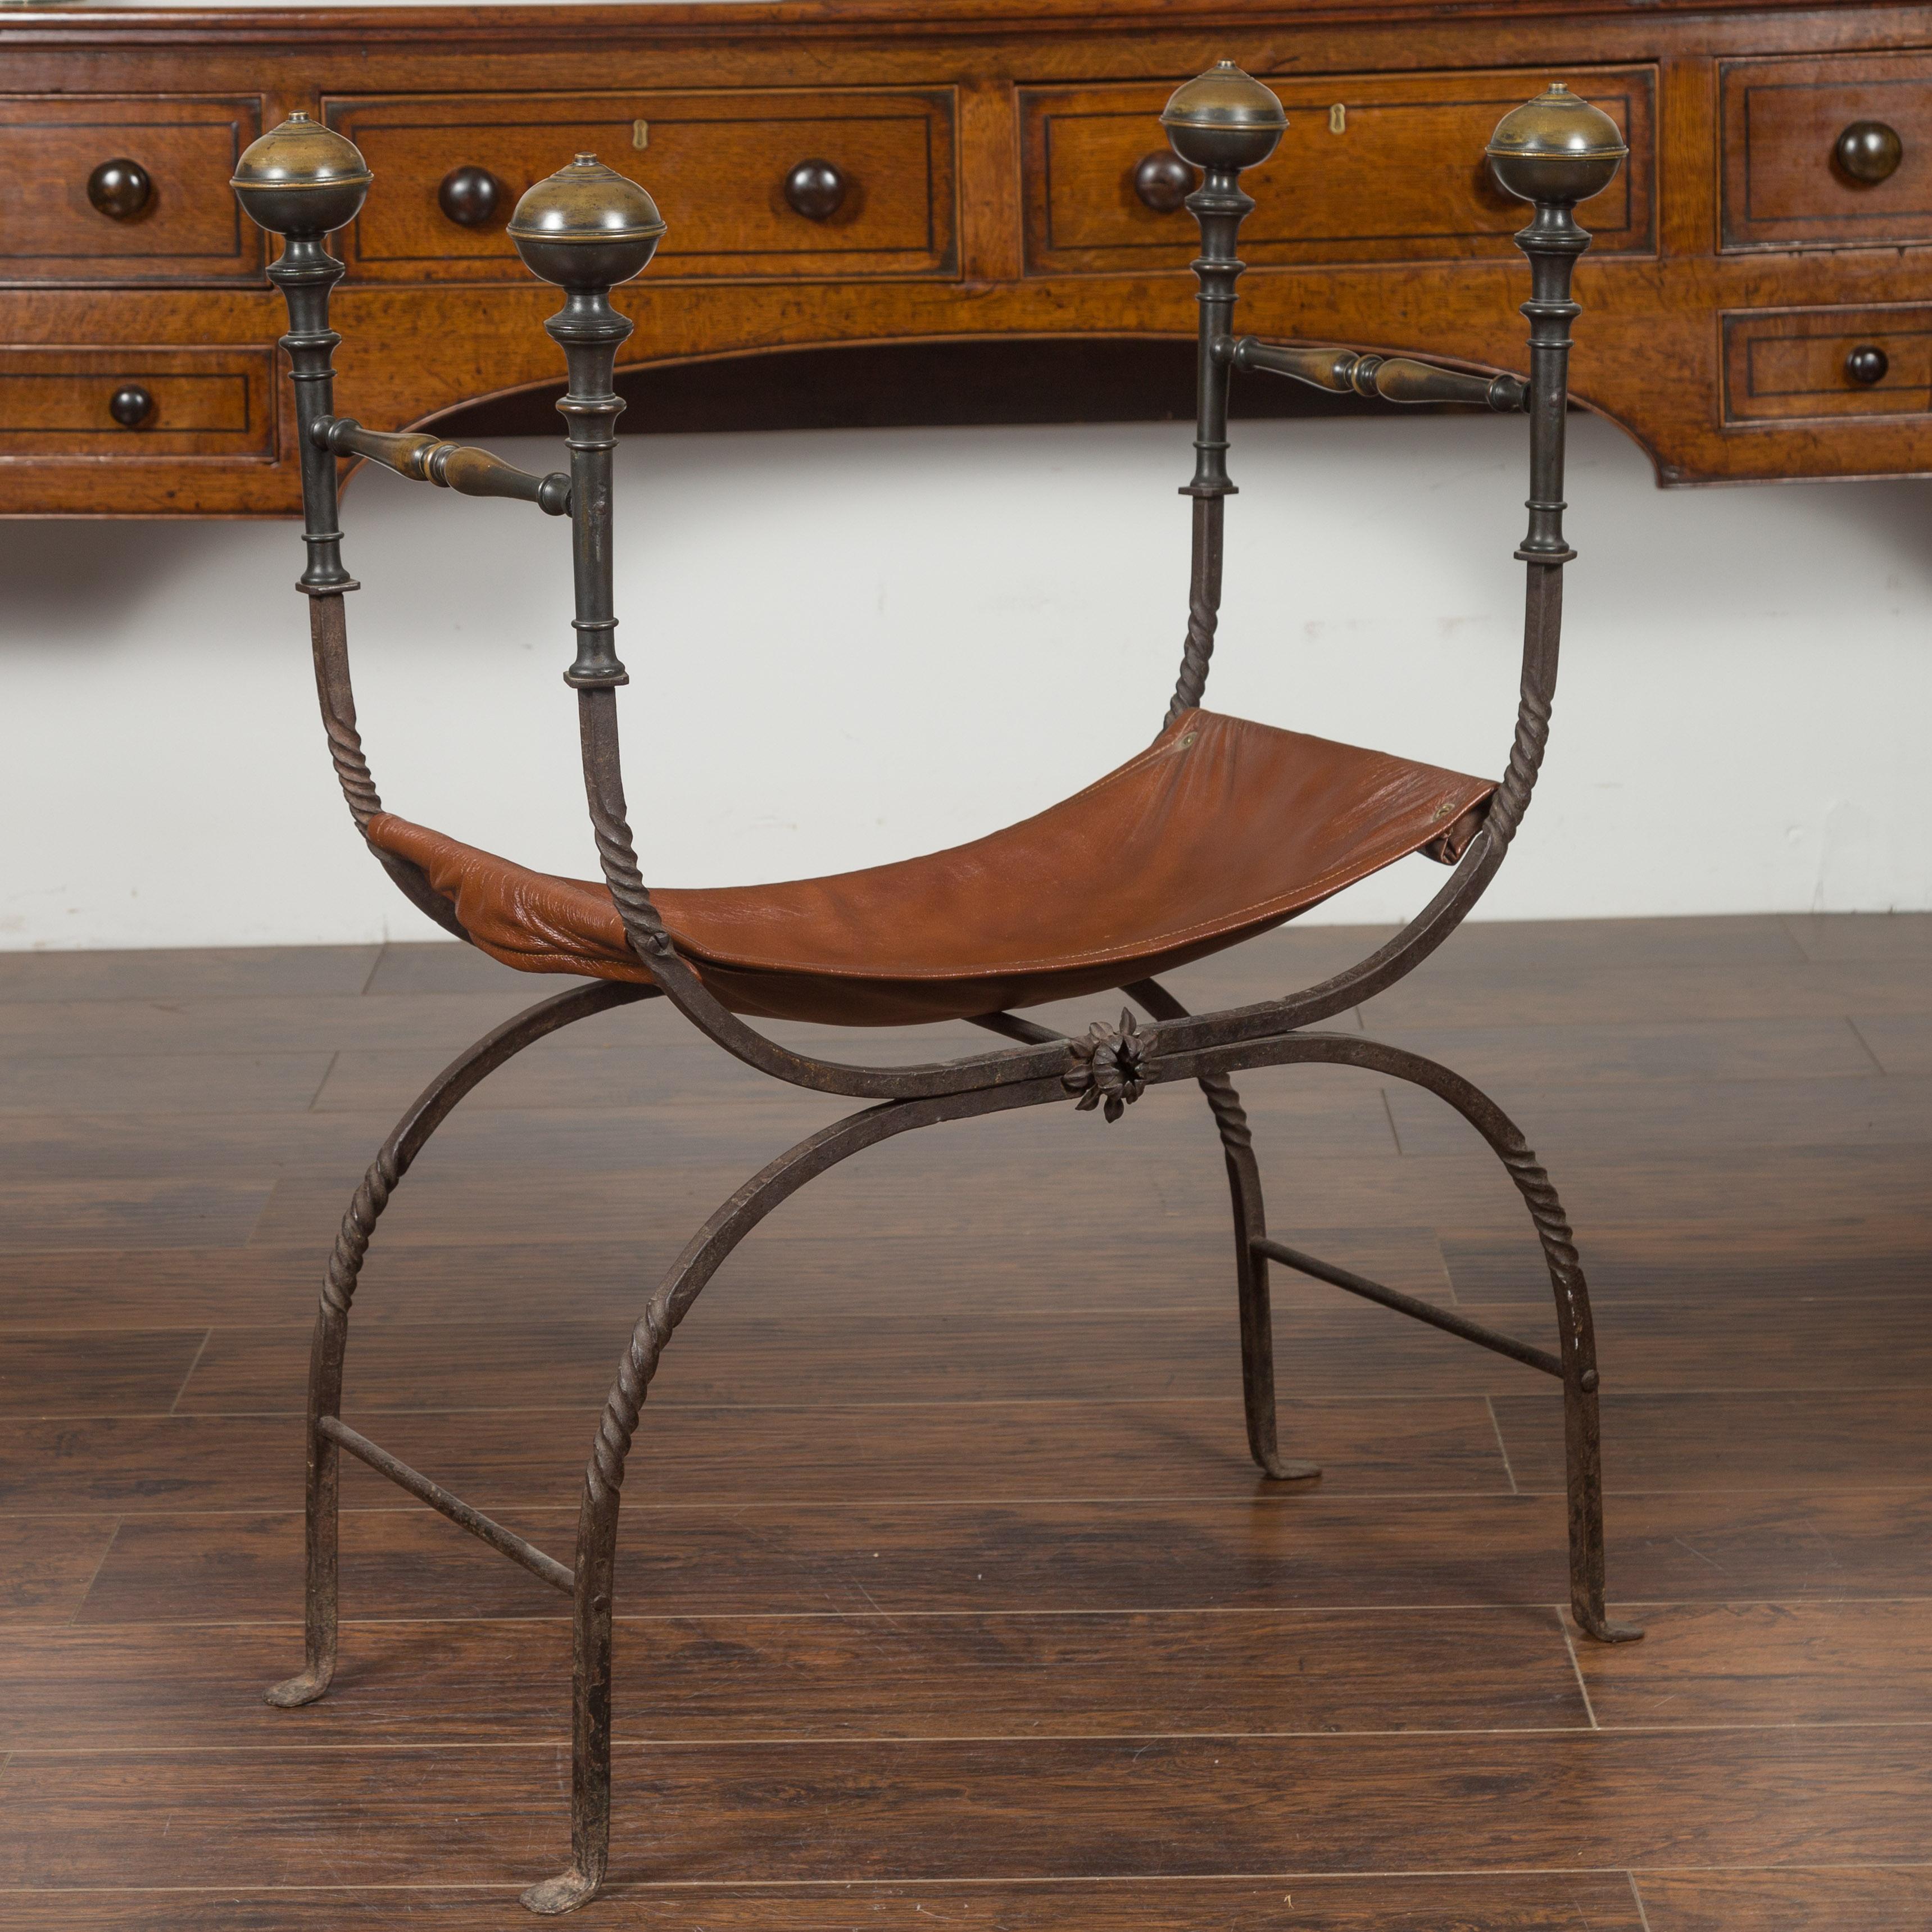 Italian 1900s Leather Seat Iron Folding Curule Stool with Toupie Finials For Sale 4